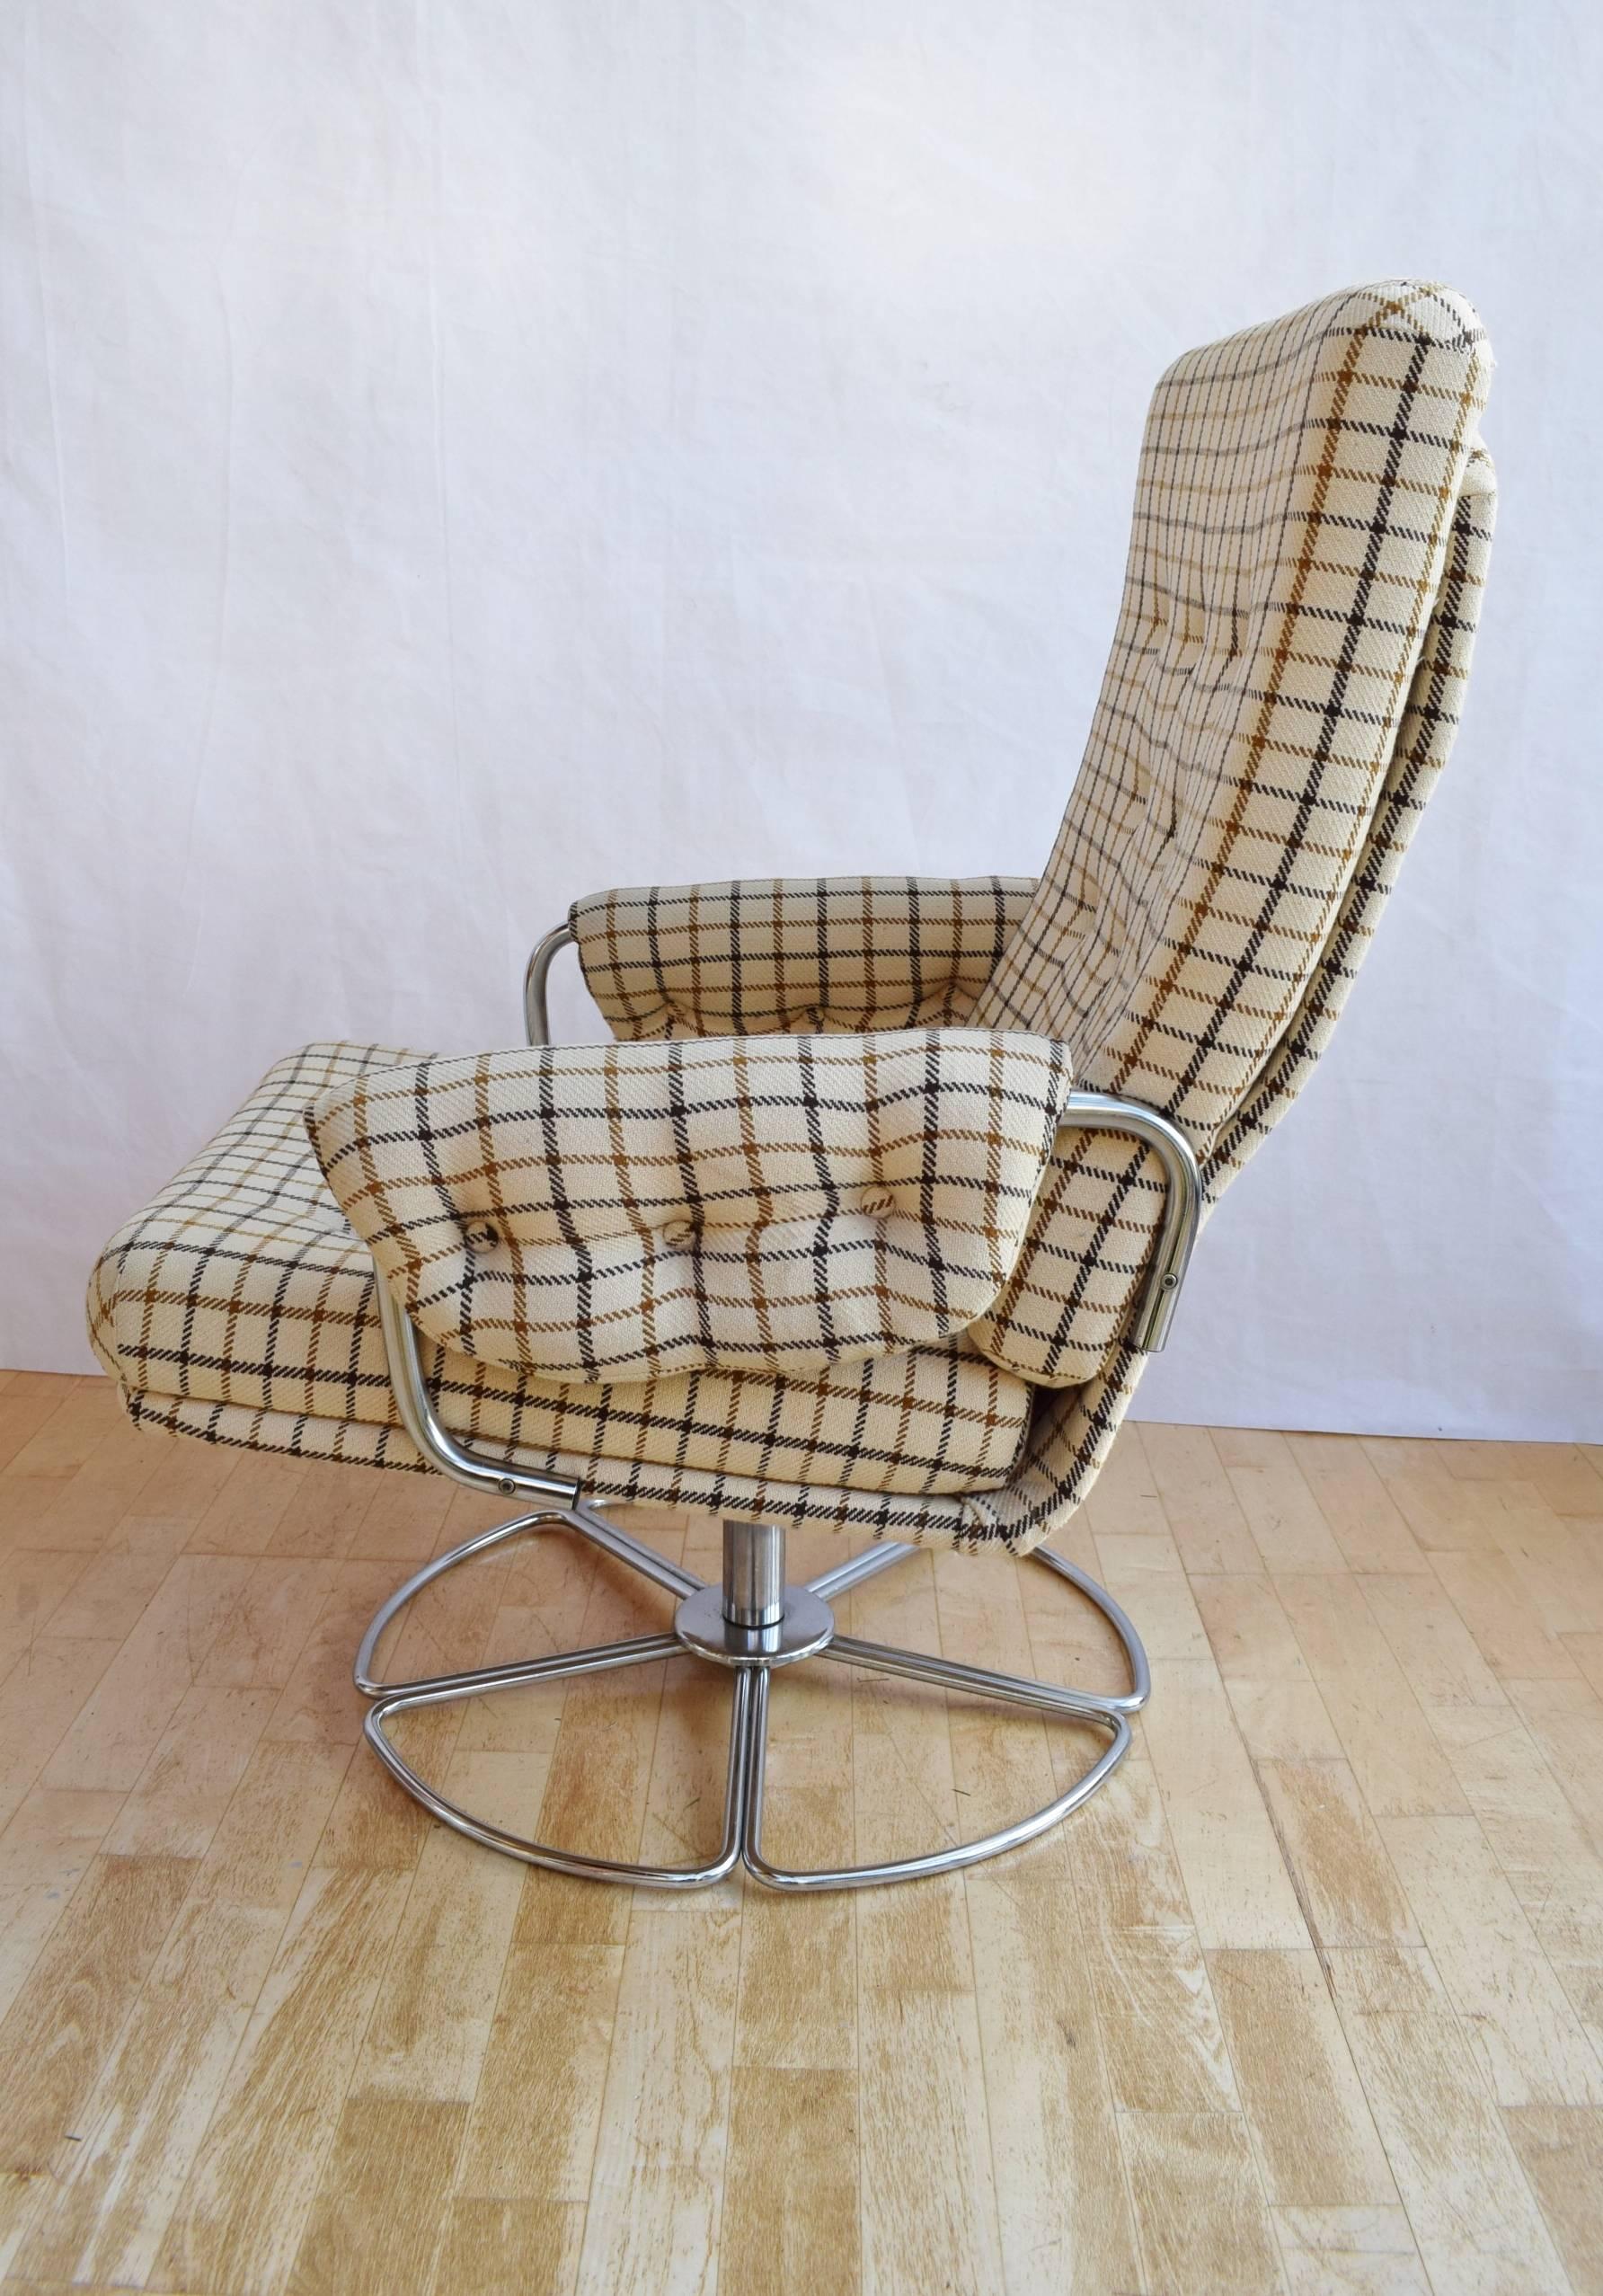 Designer: Danish Design

Manufacturer: Unknown

Country: Denmark

Date: 1970s

Material: Metal frame and swivel base with patterned wool upholstery

Maximum dimensions: Width 77cm, depth 84cm, height 92cm and seat height 41cm

Condition: